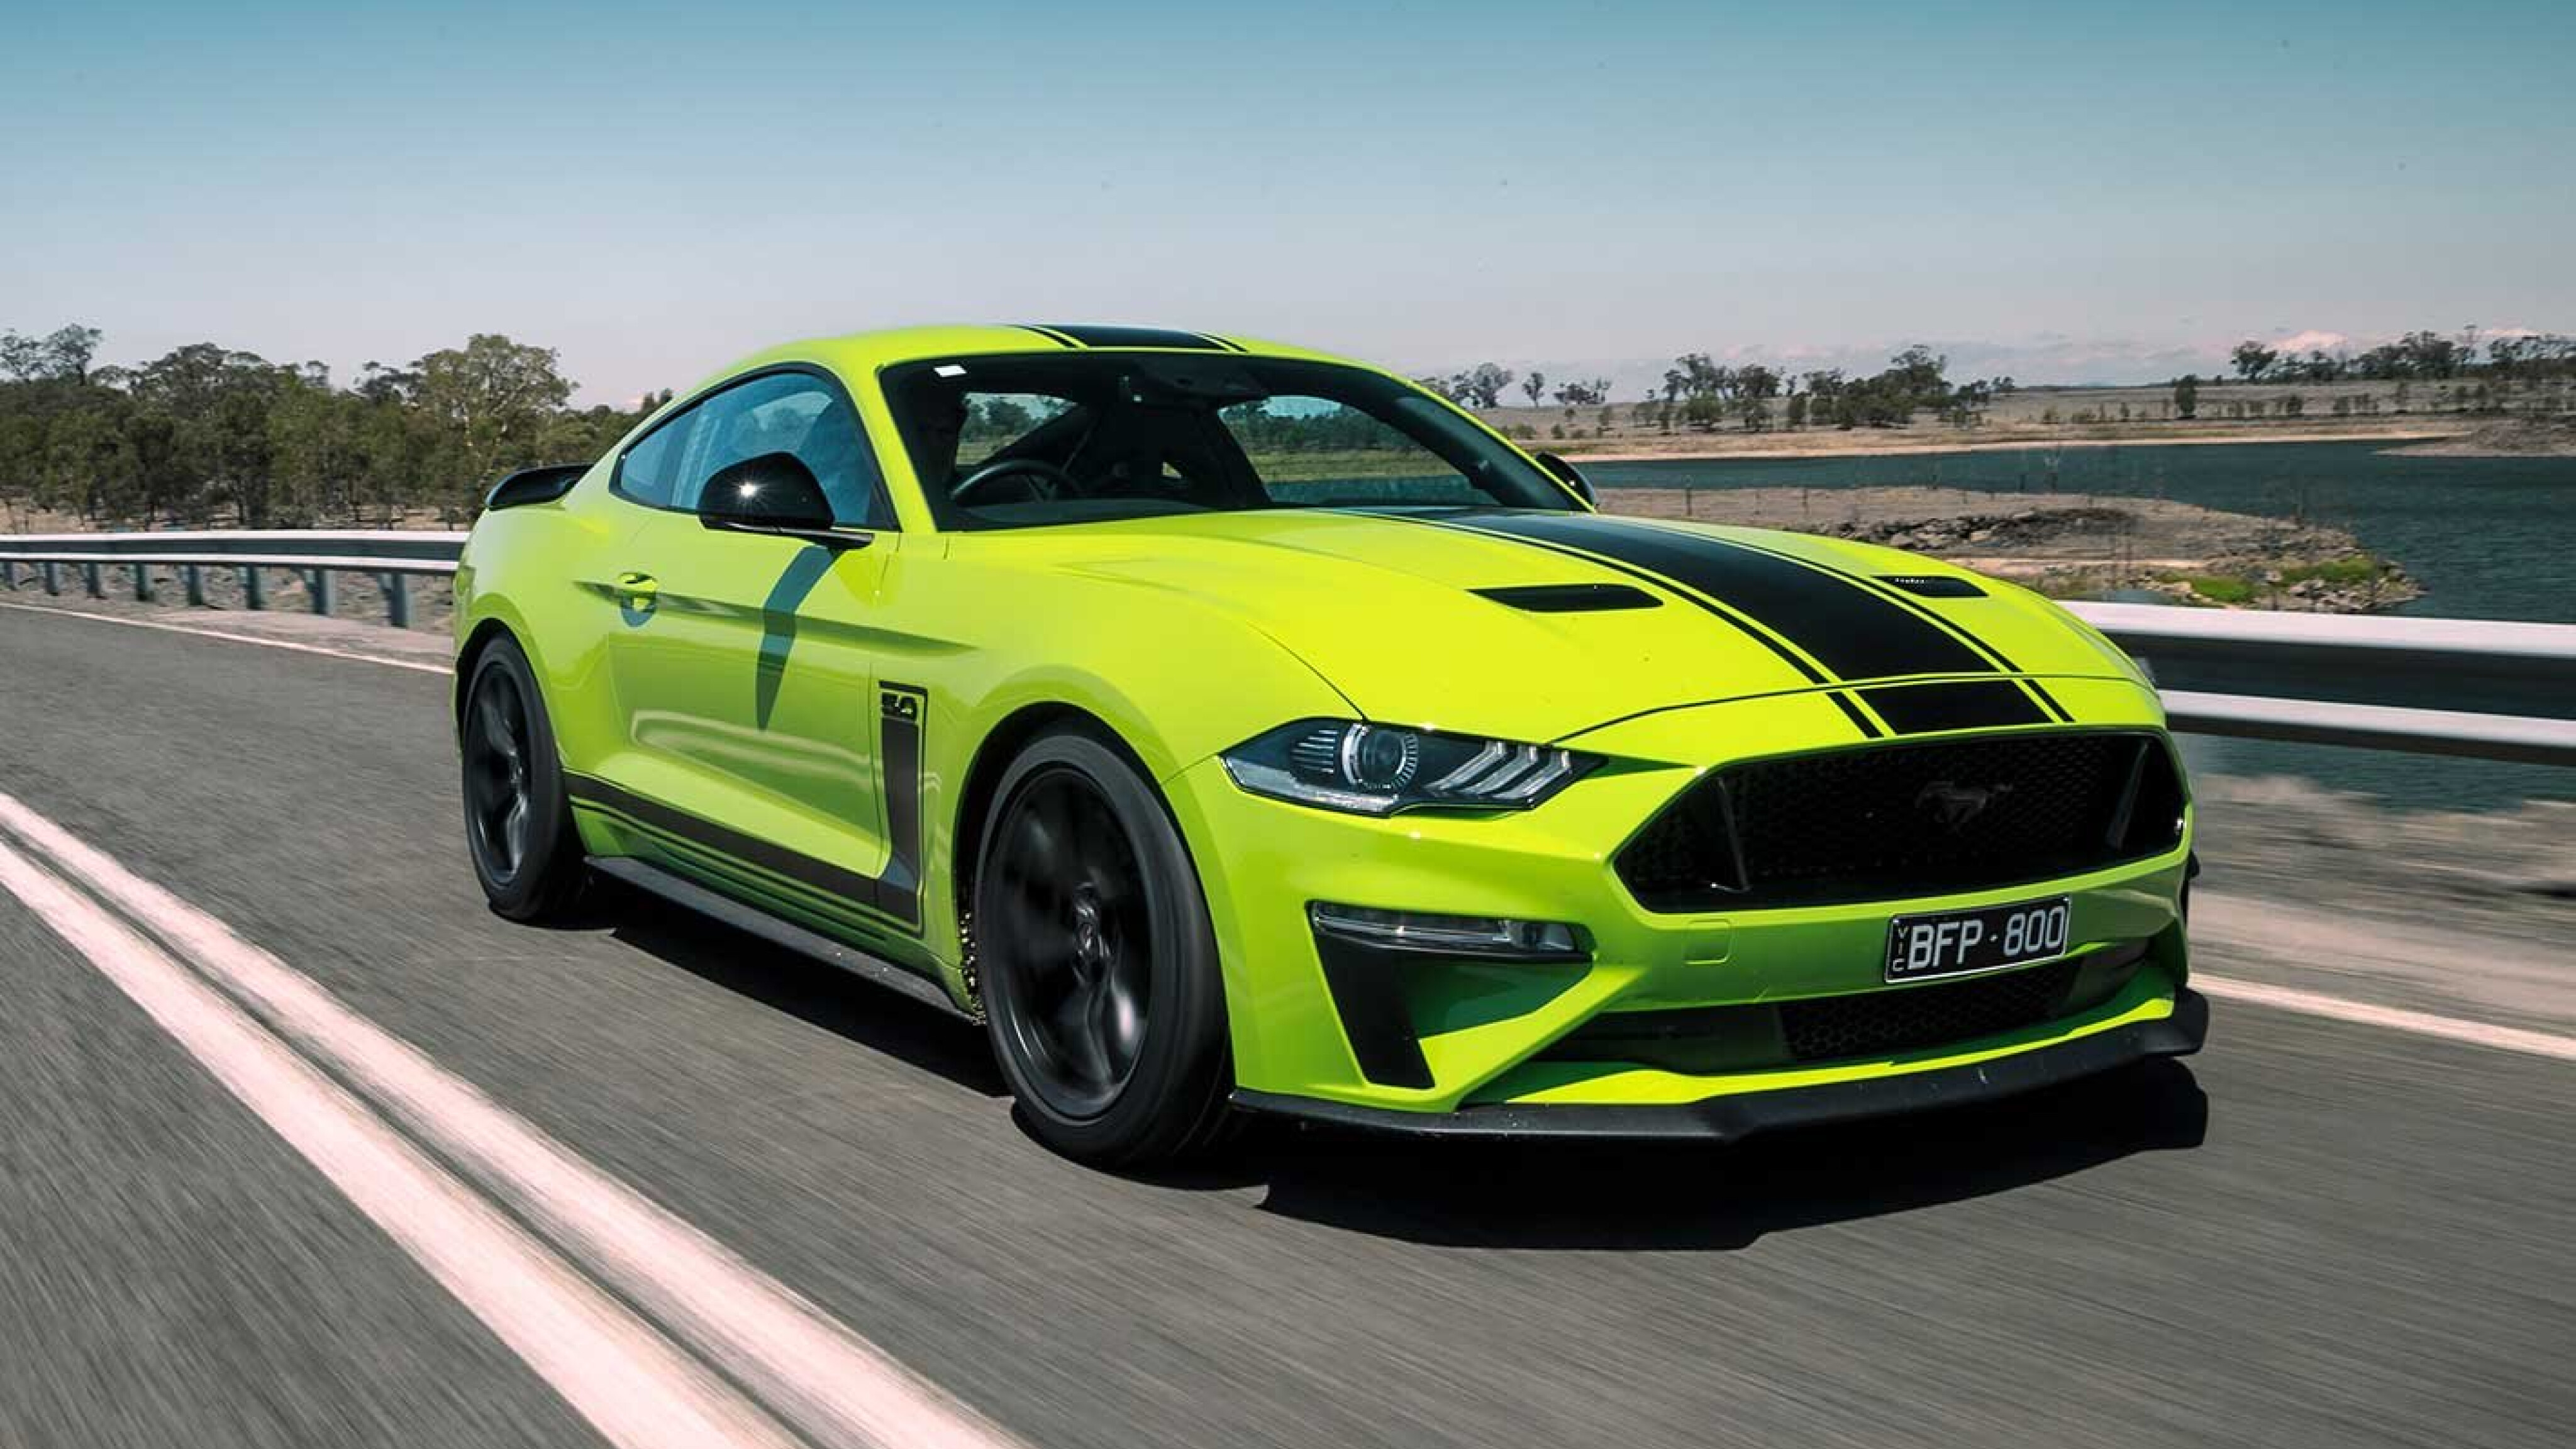 https://assets.whichcar.com.au/image/upload/s--ZRKqPCjj--/c_fill,f_auto,q_auto:good/t_p_16x9/v1/archive/whichcar/2020/02/20/-1/Ford-Mustang-R-Spec-review.jpg